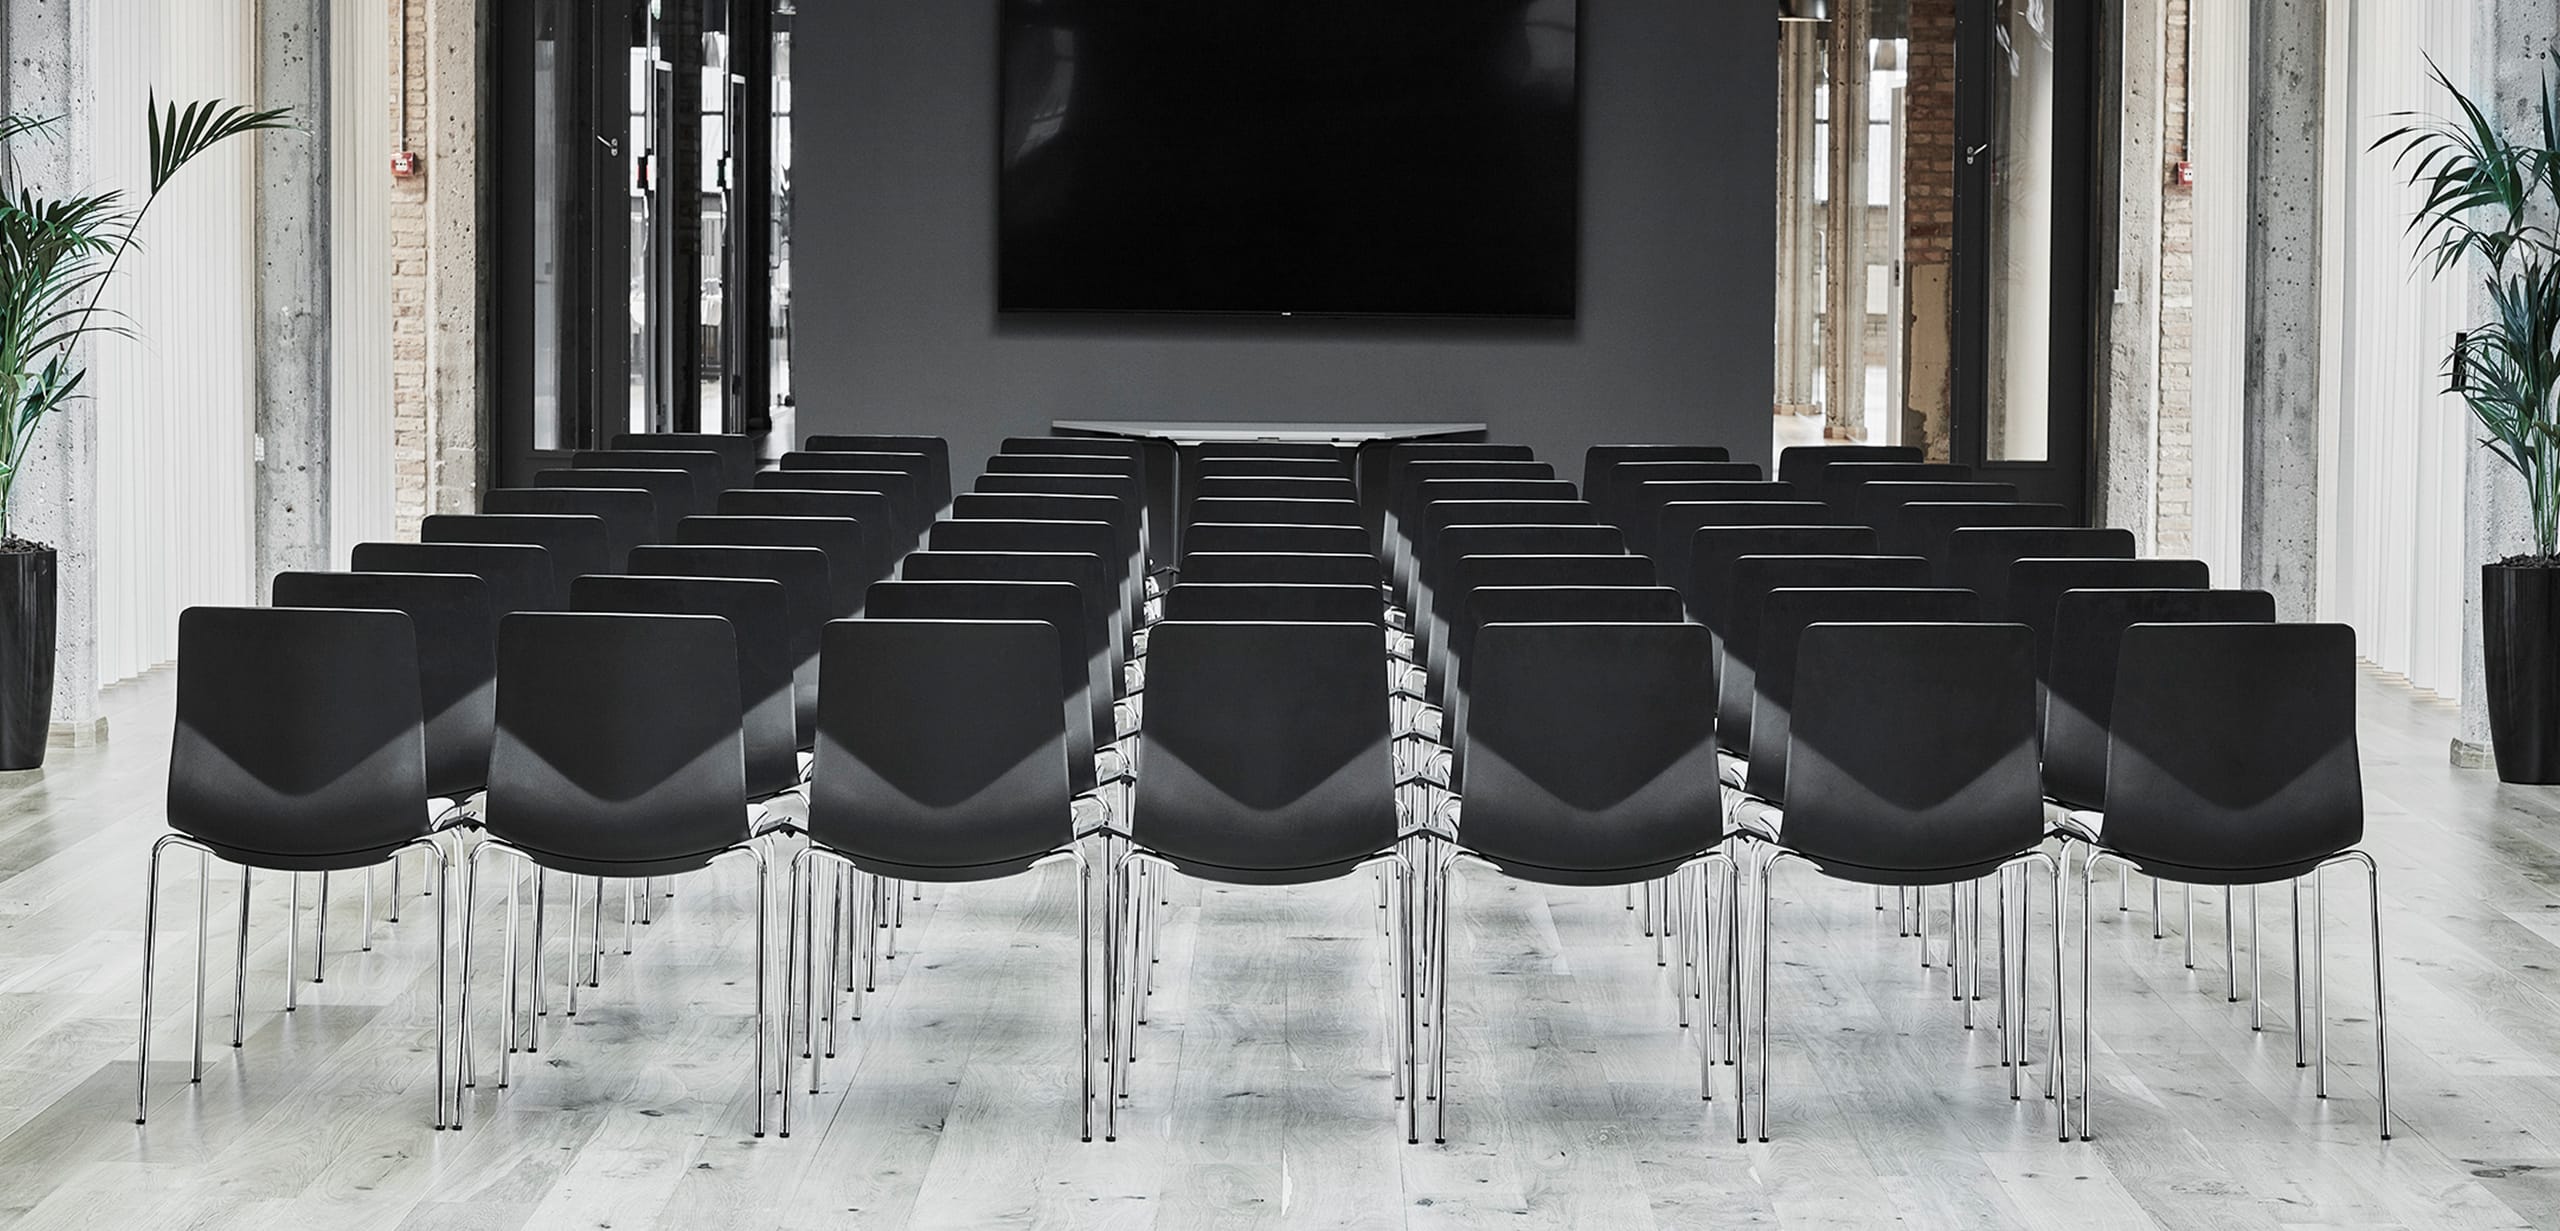 A row of black office desk chairs in a conference room with a tv.